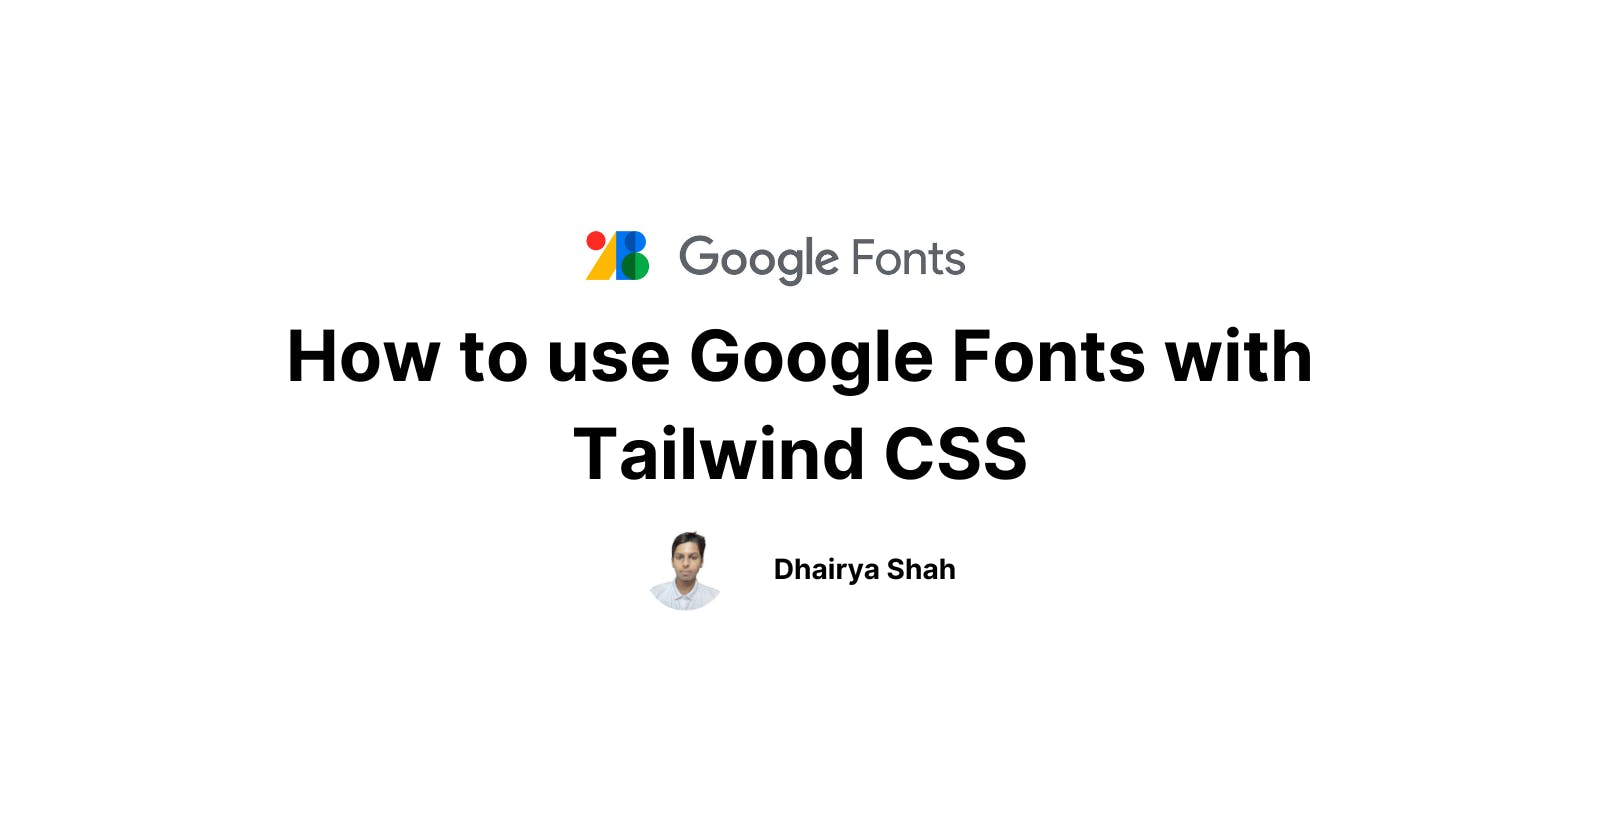 How to use Google Fonts with Tailwind CSS